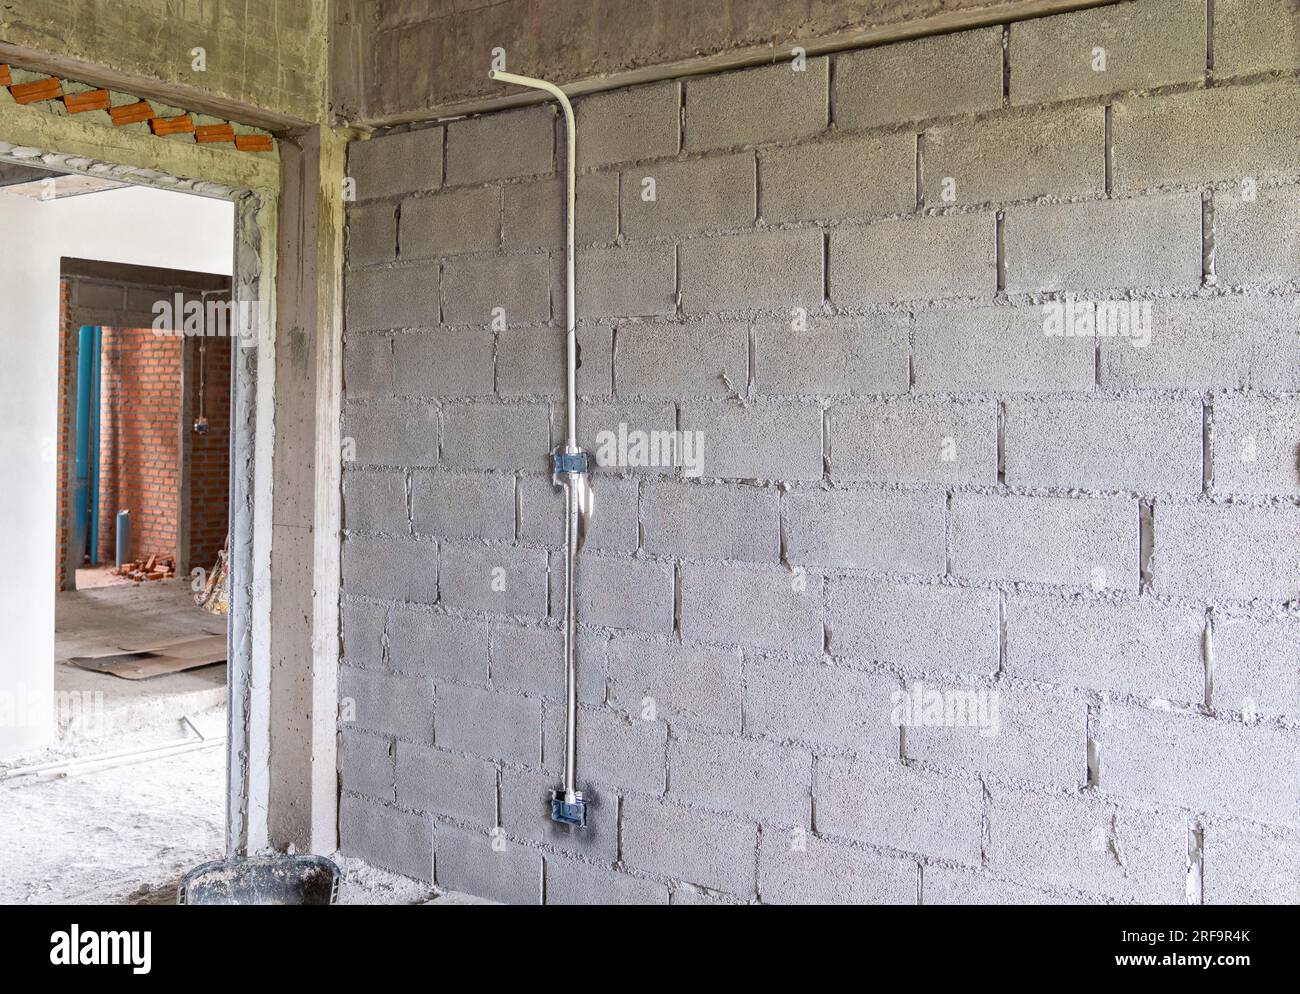 Iron blocks that were buried in the walls of the house. with a white PVC pipe running down. Preparing for the electrical installation in the building. Stock Photo